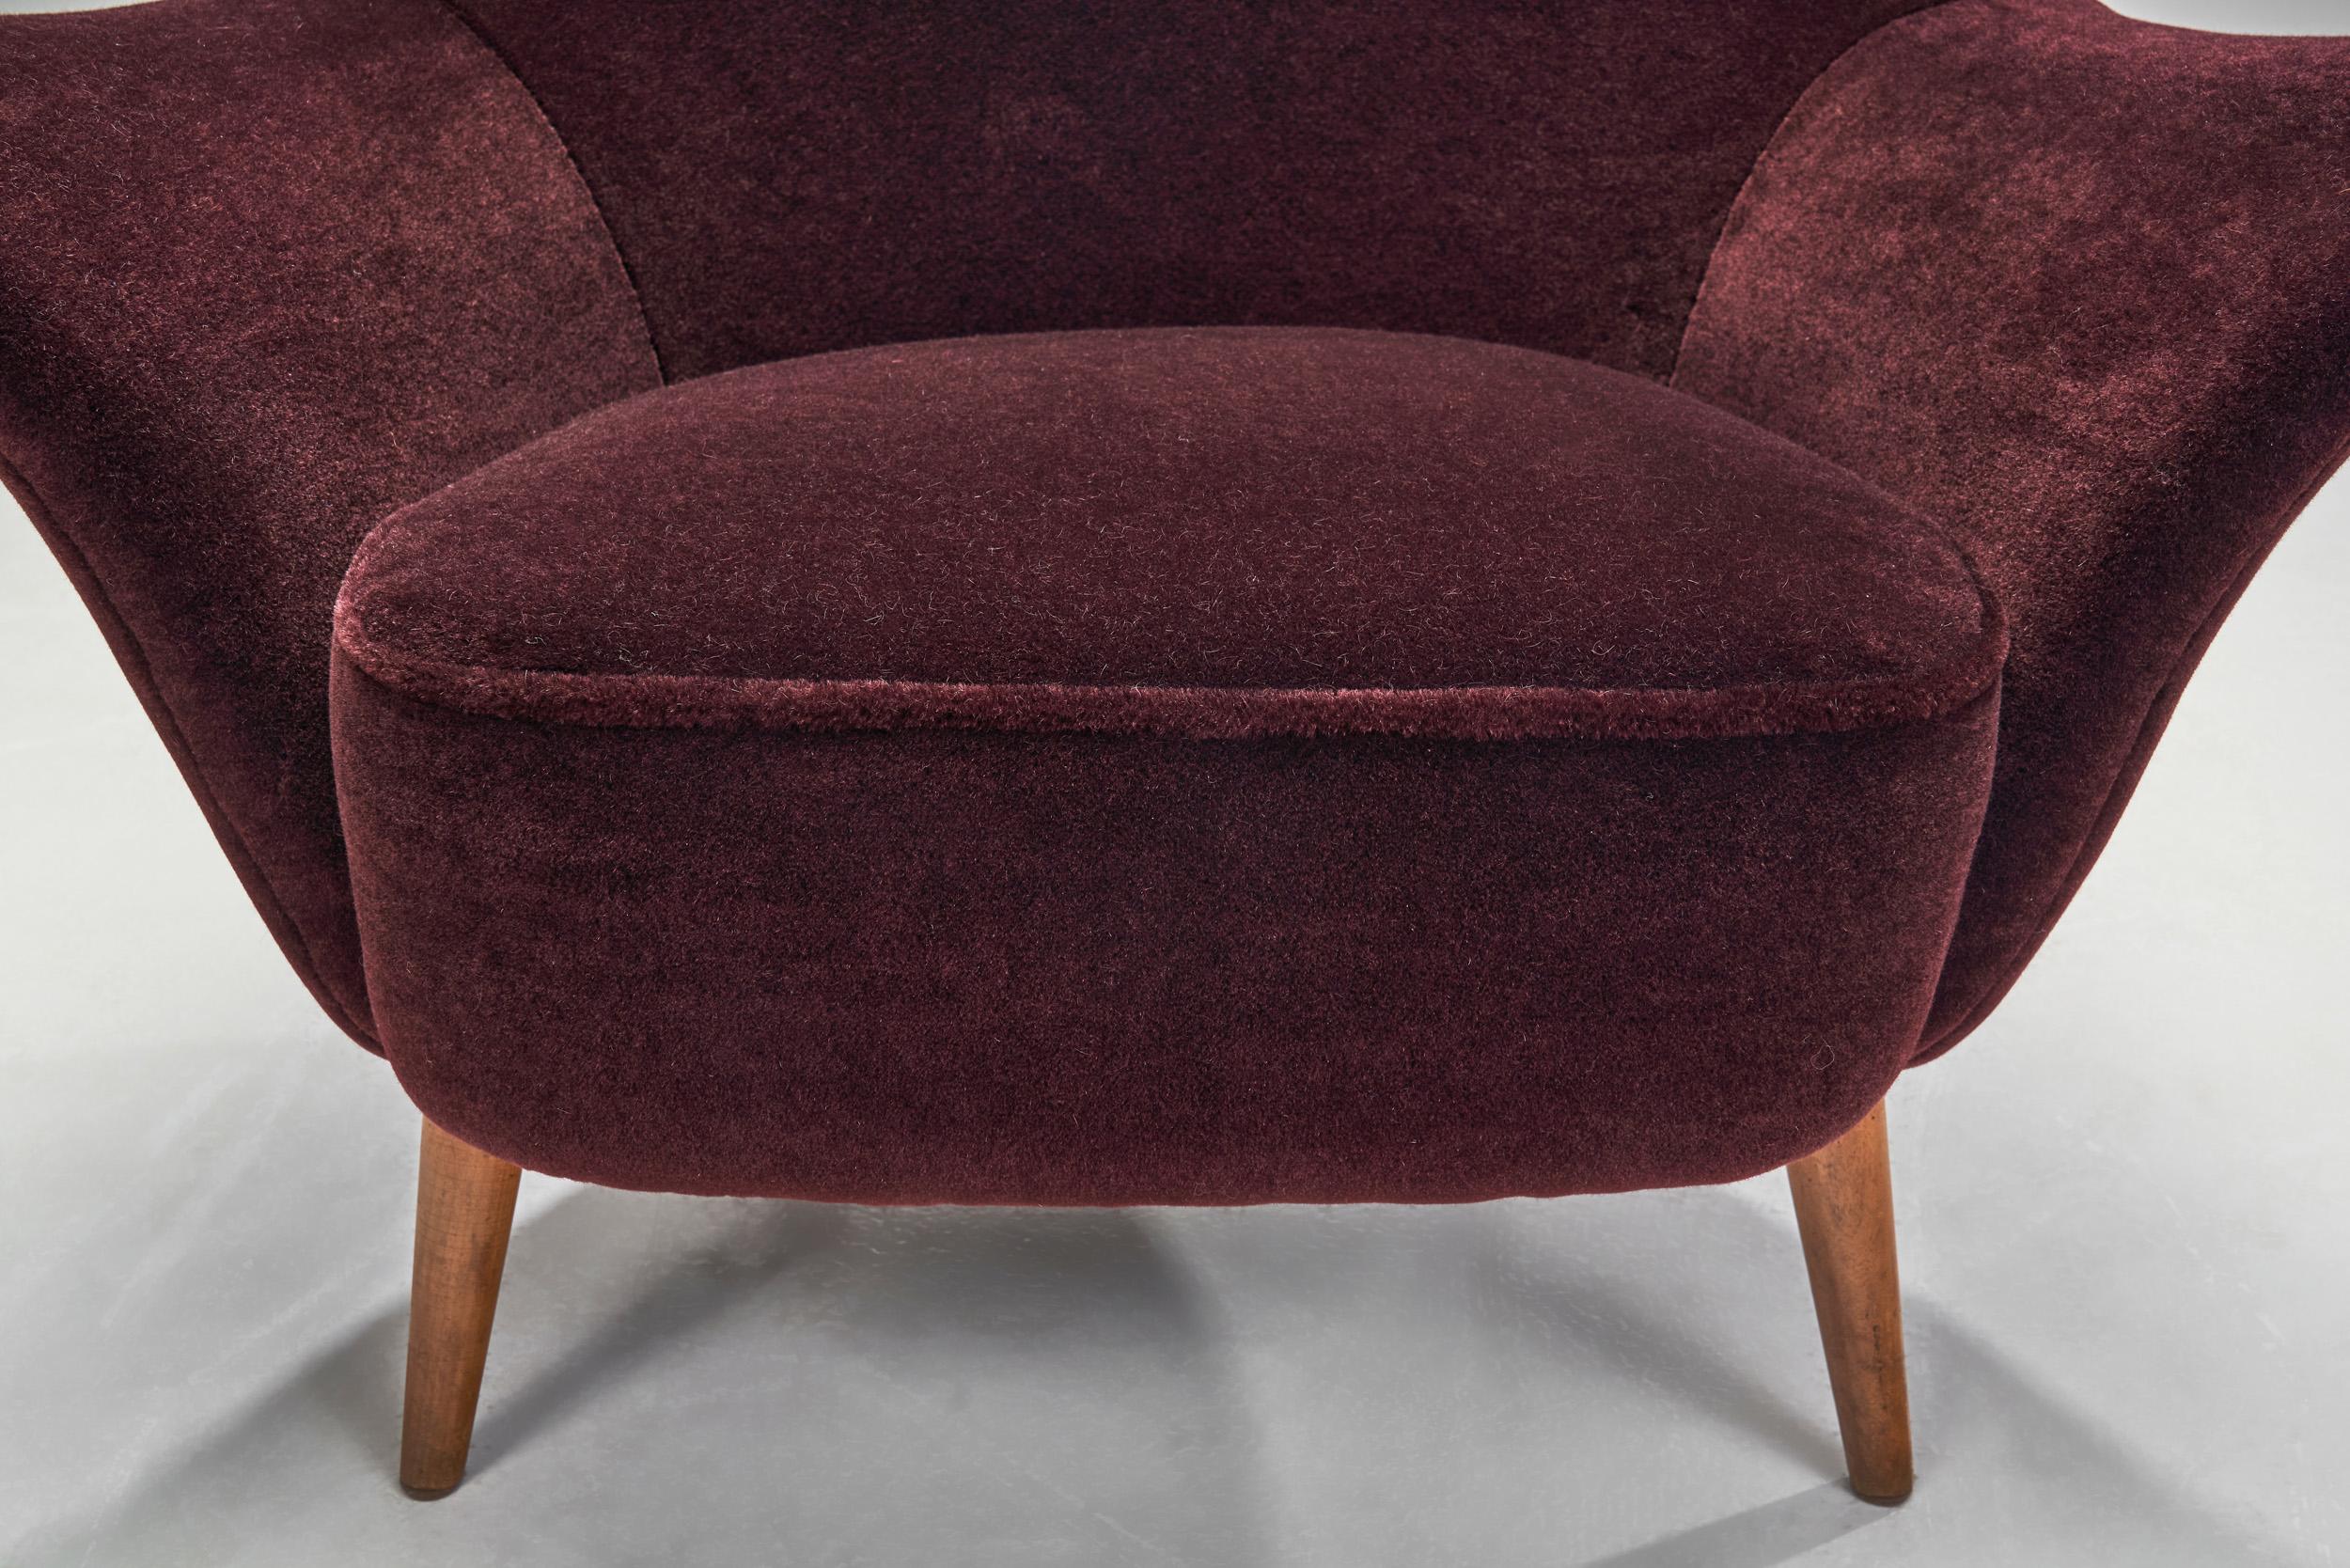 French Lounge Chairs In Aubergine Coloured Mohair, France ca 1960s In Good Condition For Sale In Utrecht, NL